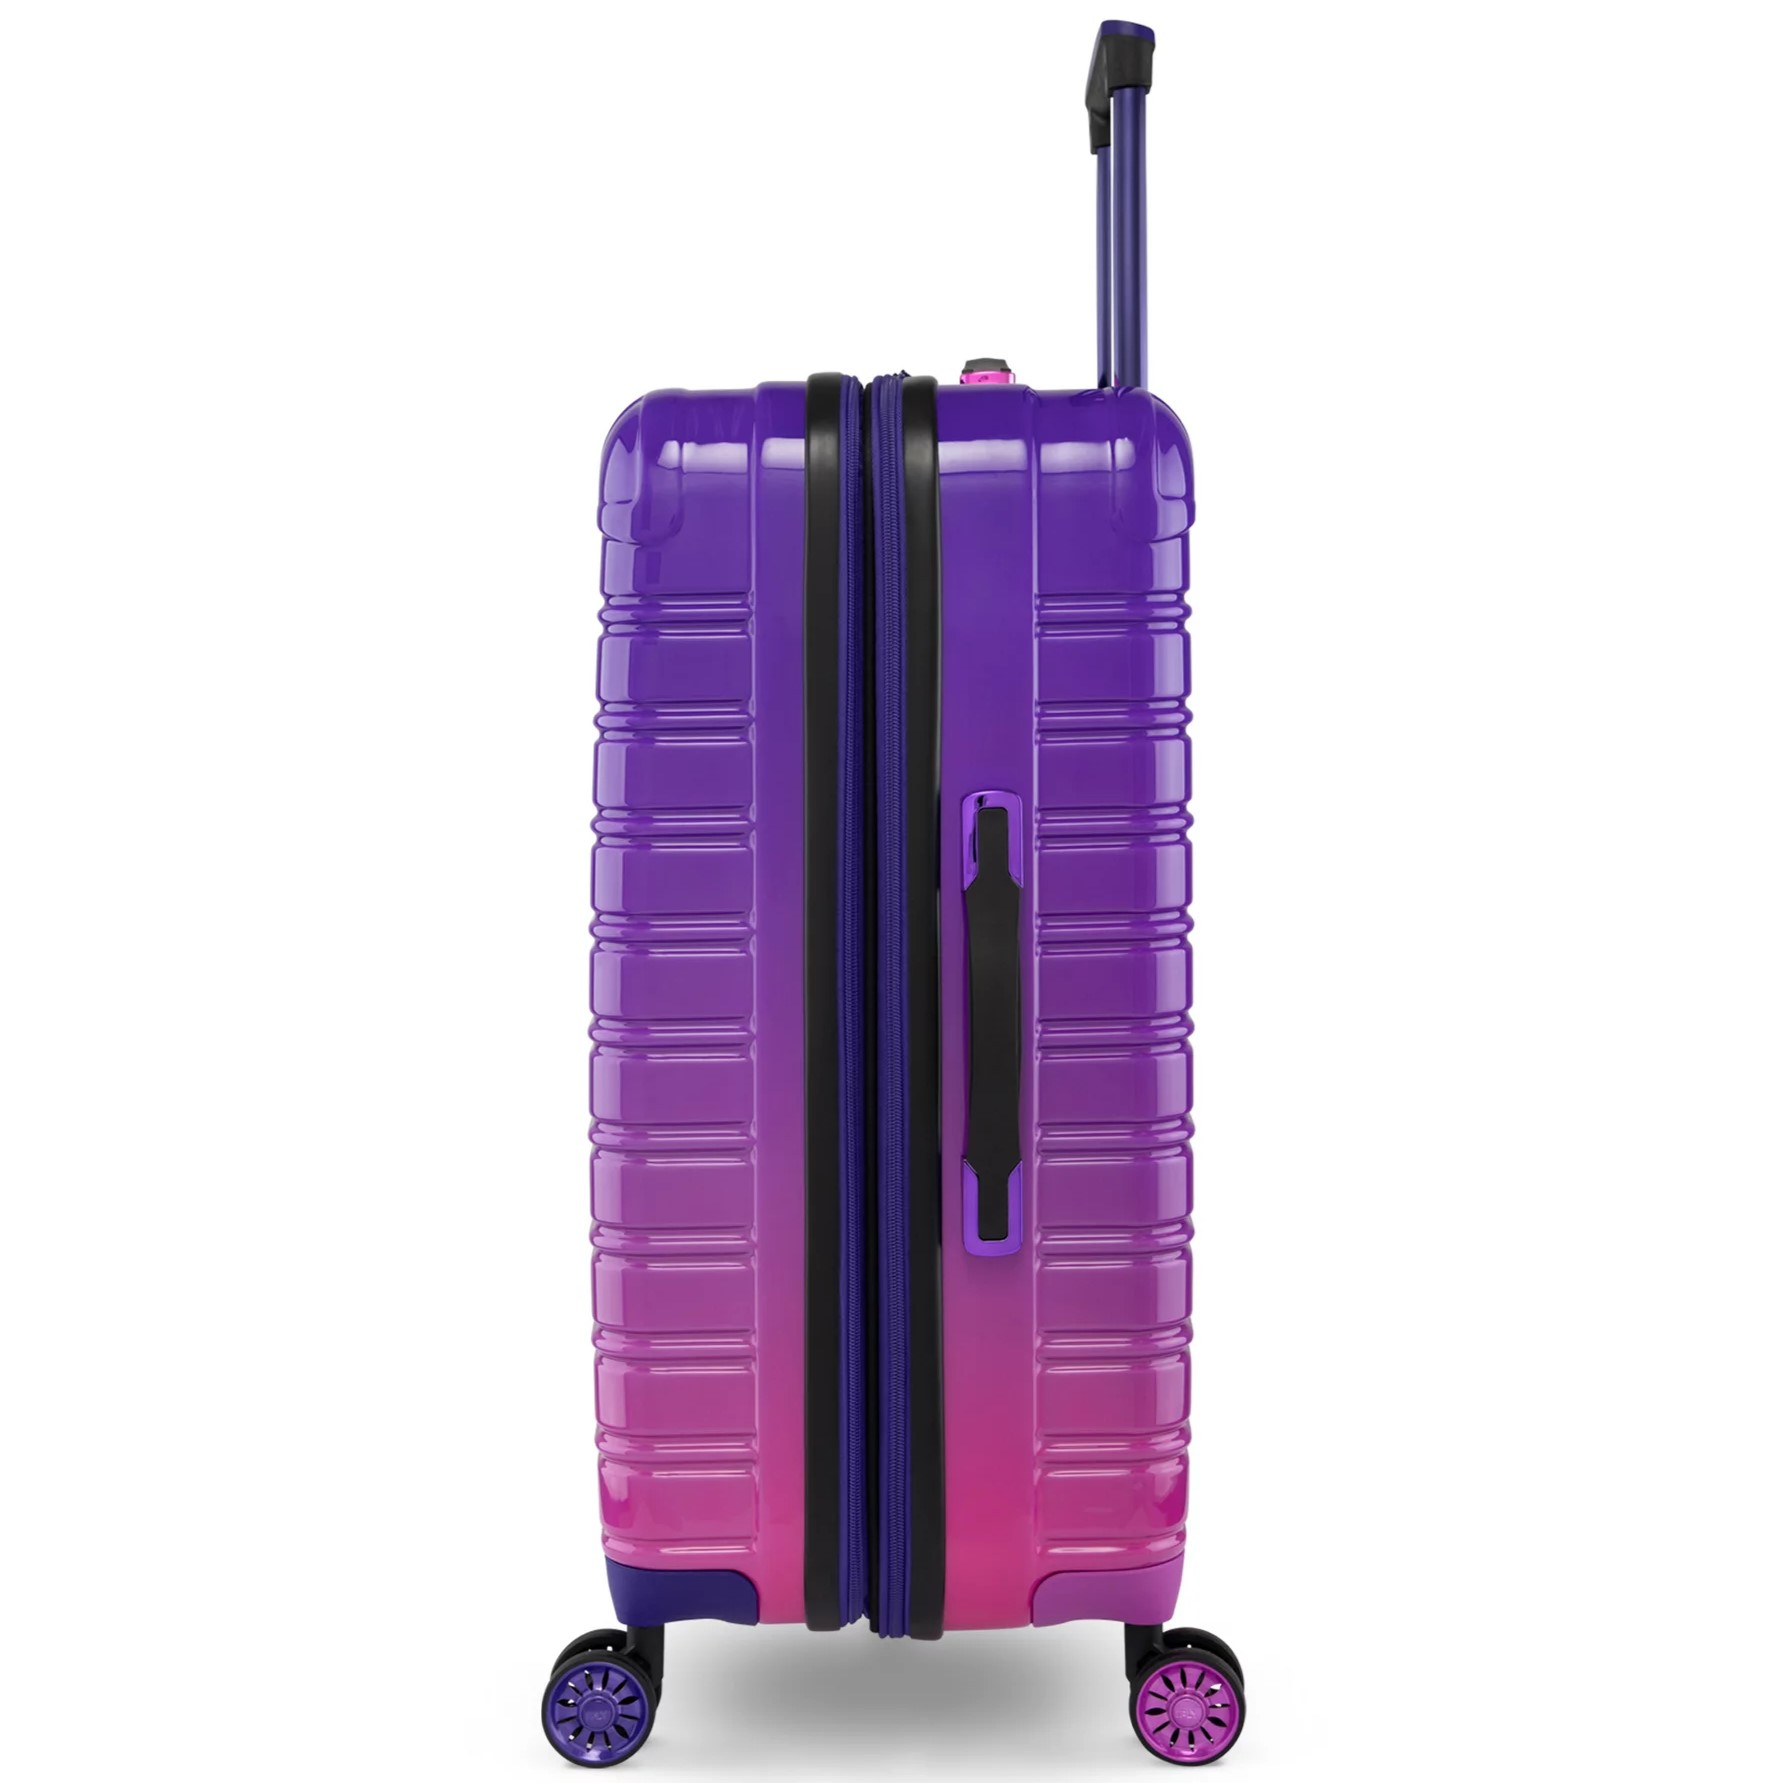 VALI MÀU TÍM LOANG DU LỊCH IFLY FIBERTECH OMBRE HARDSIDE LUGGAGE IN MIDNIGHT BERRY 14